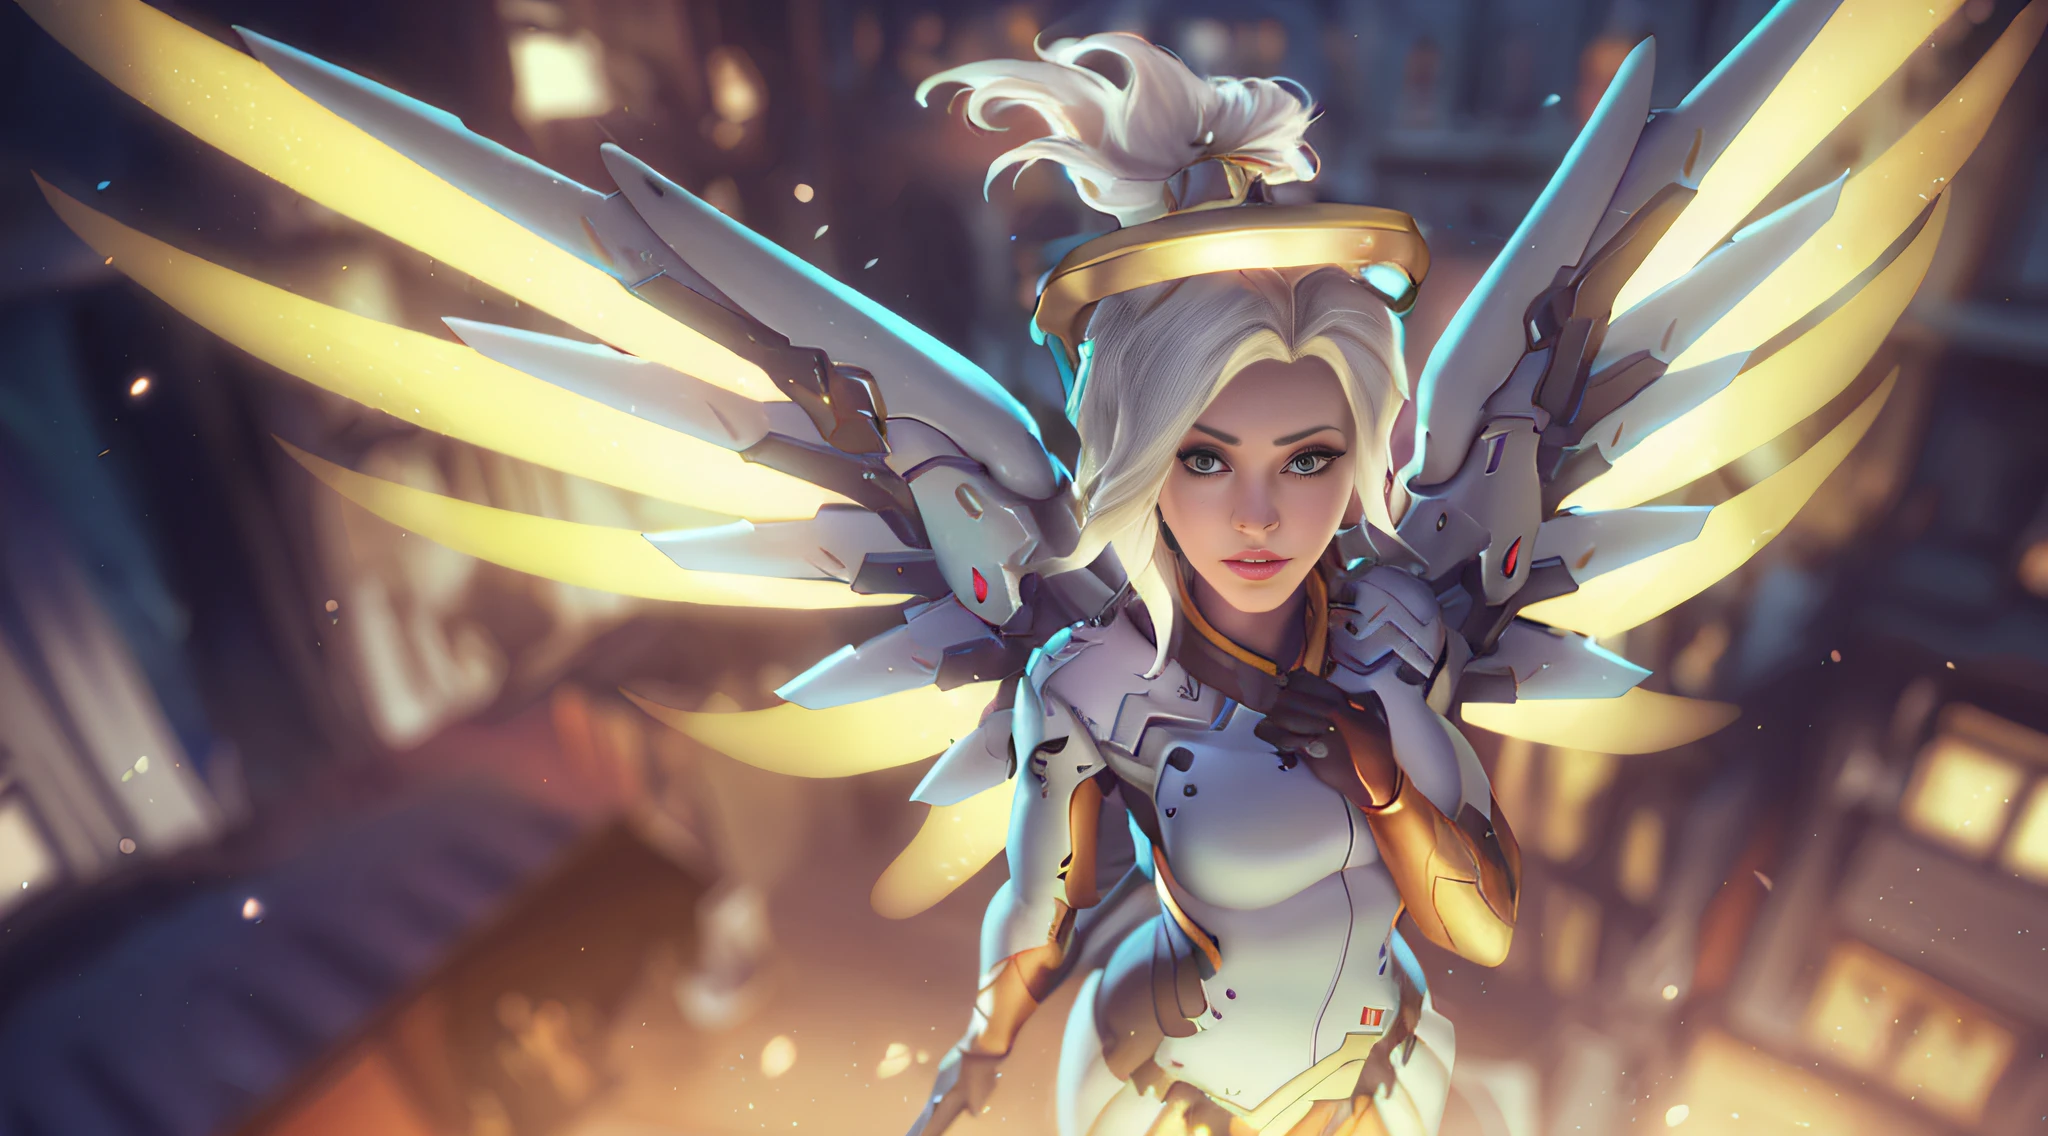 anime big breast, A gray-haired one，Woman with a golden crown on her head, overwatch fanart, mercy from overwatch game (2016), pitying ( Overwatch ), Extremely detailed Artgerm, mercy from overwatch, Artgerm and Atey Ghailan, from overwatch, official overwatch game art, overwatch splash art, Rosla global lighting, :: rossdraws